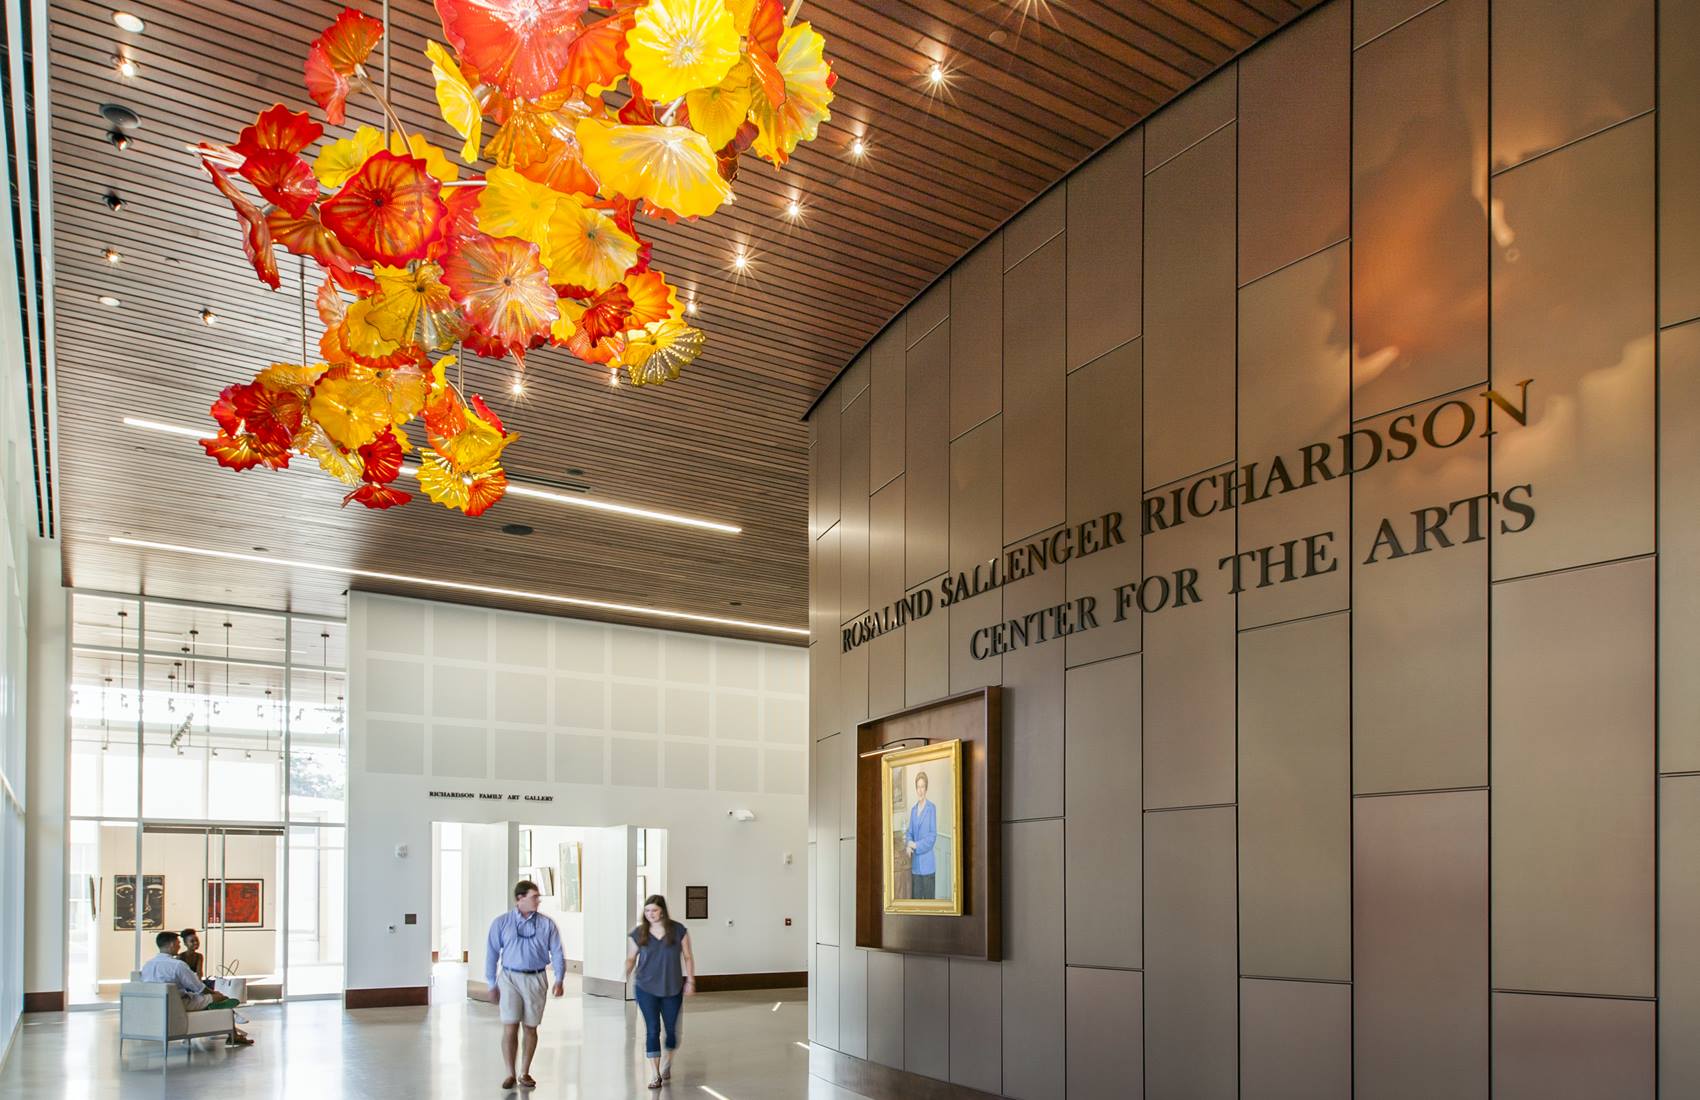 Main lobby of the Rosalind Sallenger Richardson Center for the Arts